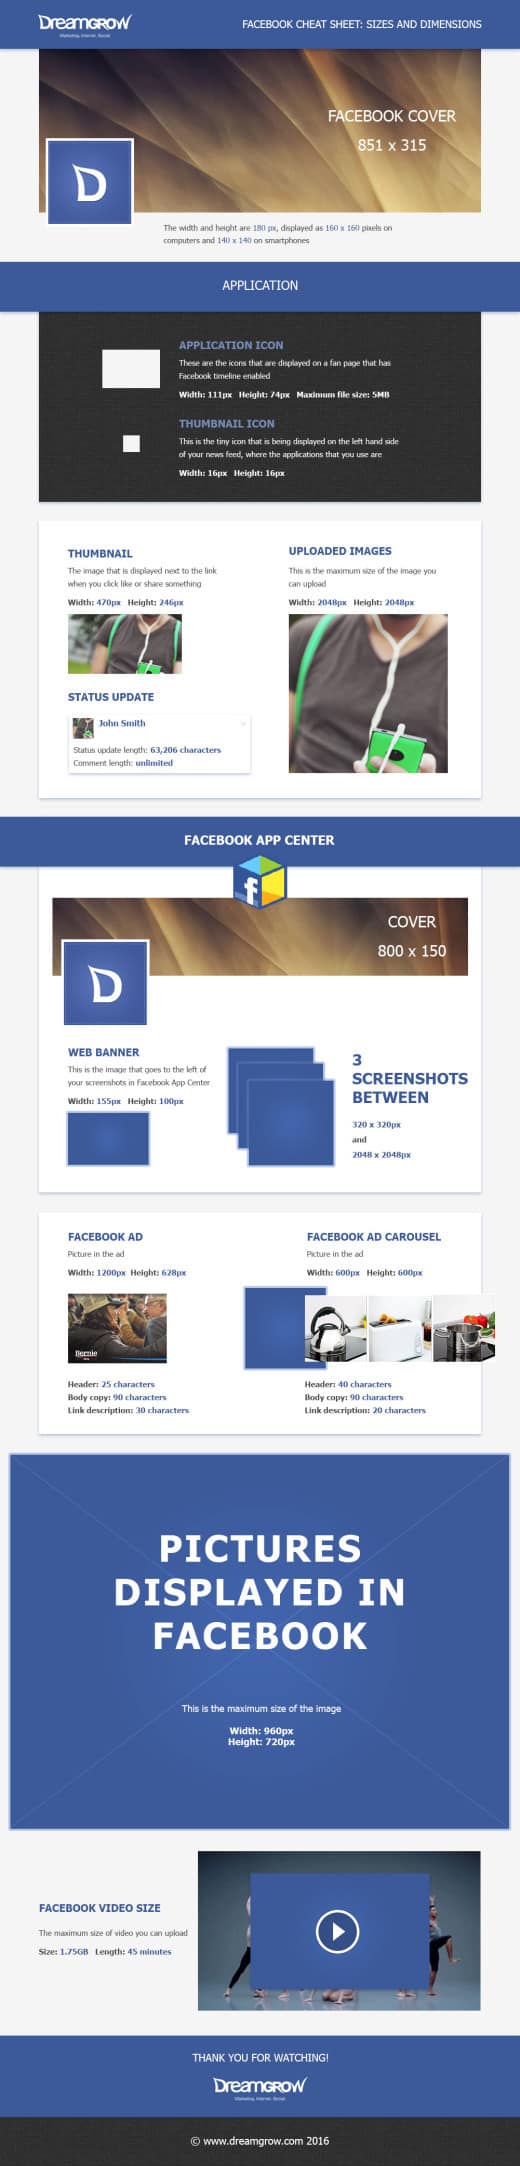 Facebook Cheat Sheet Image Size And Dimensions Facebook Image Sizes ...